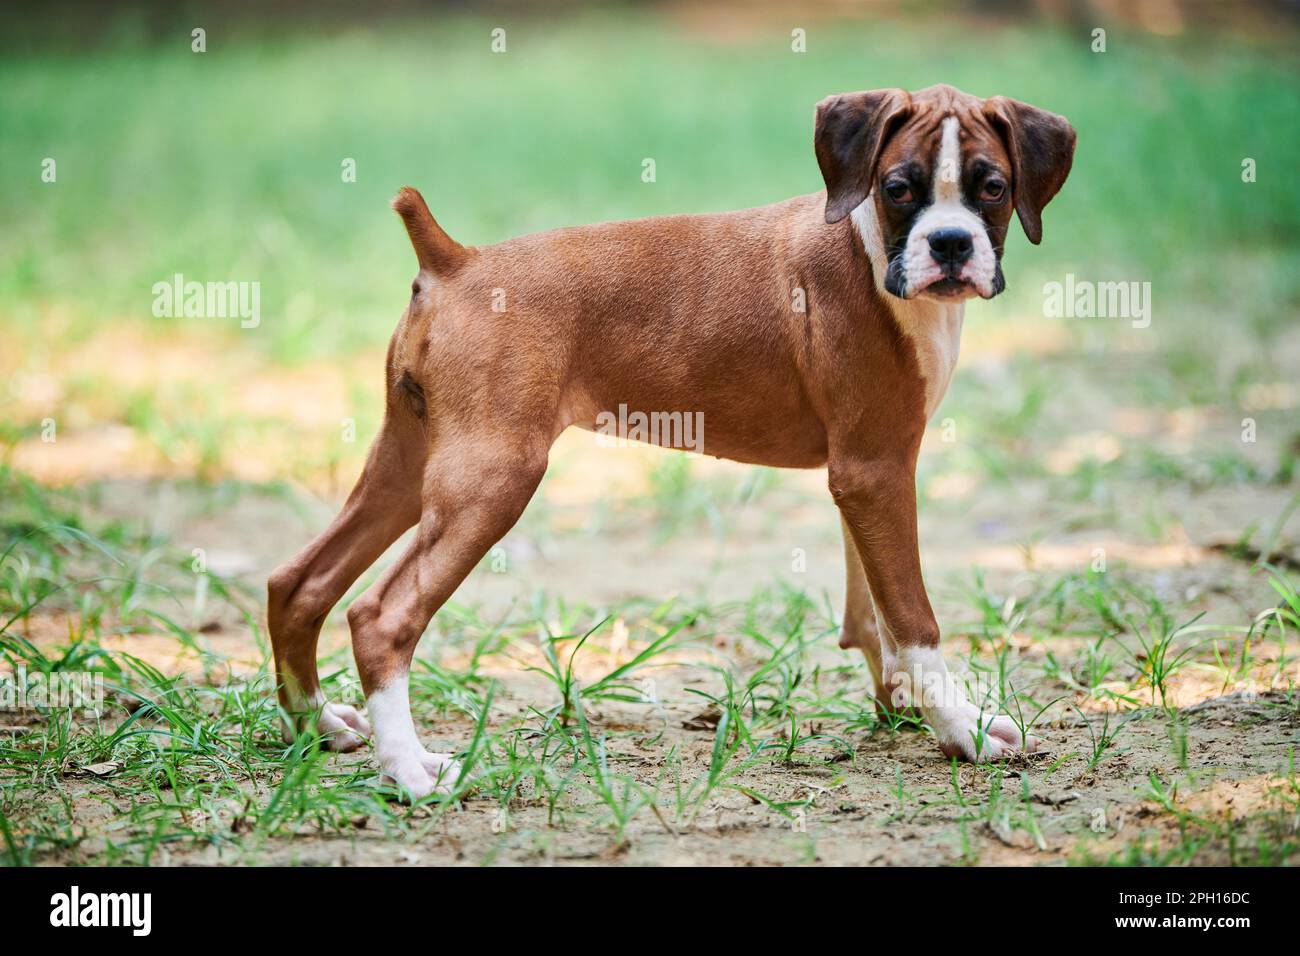 Boxer dog puppy full height side view portrait at outdoor park ...